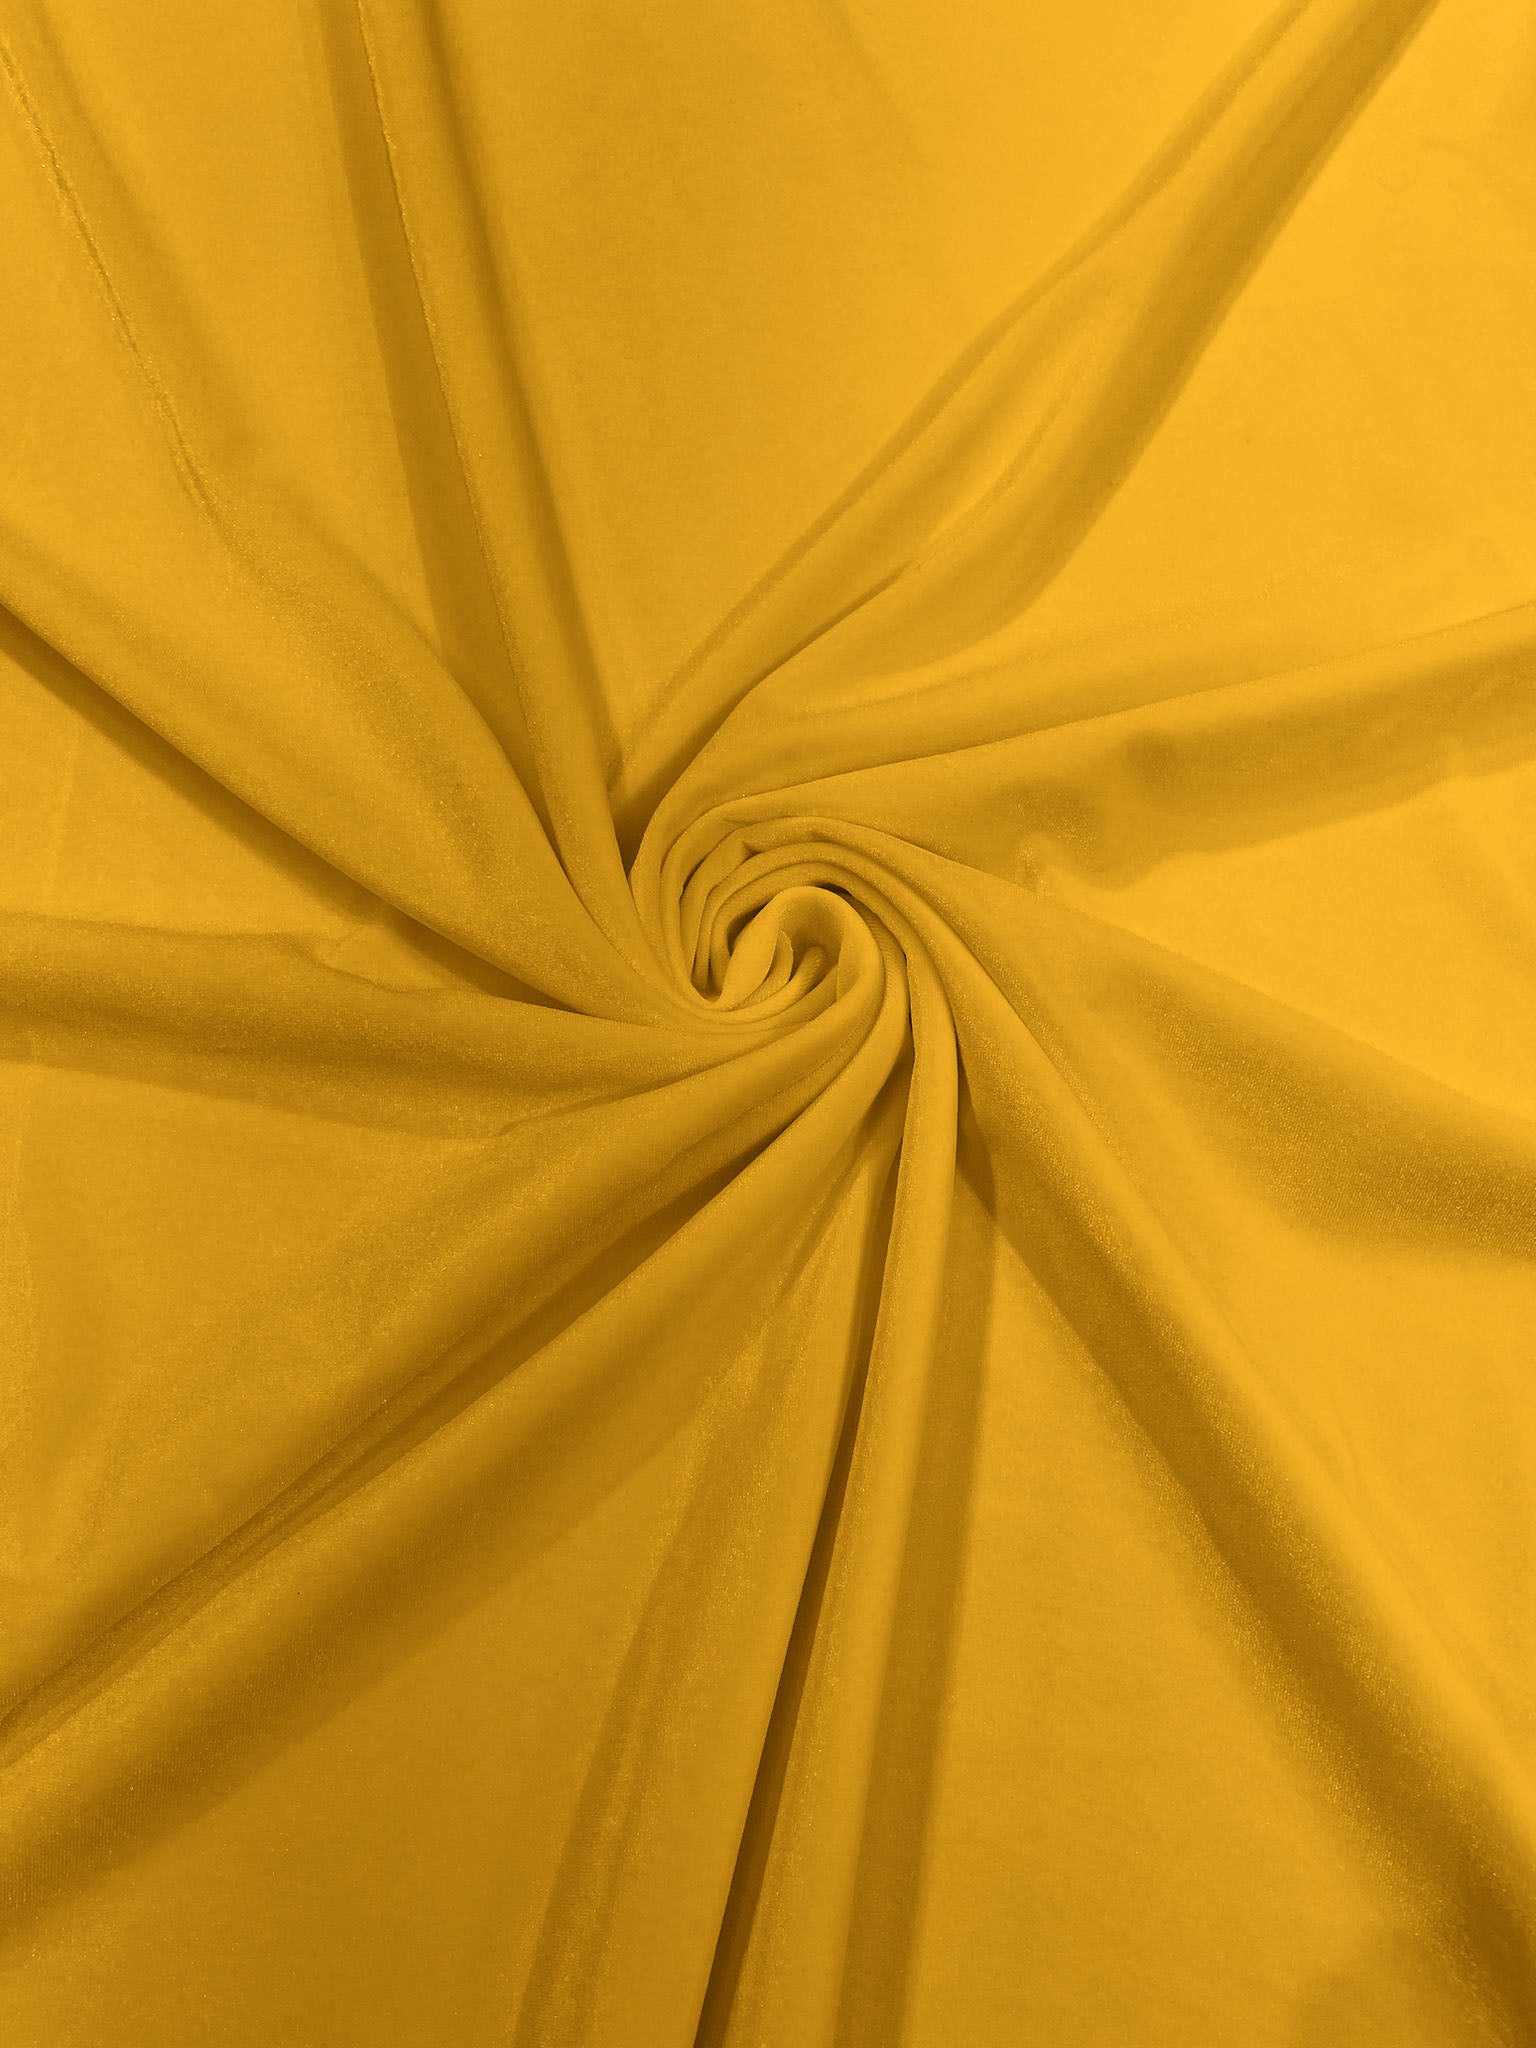 Yellow Stretch Velvet Polyester Spandex 60" Wide | Plush Velvet For Christmas, Apparel, Cosplay, Curtains, Decoration, Costume